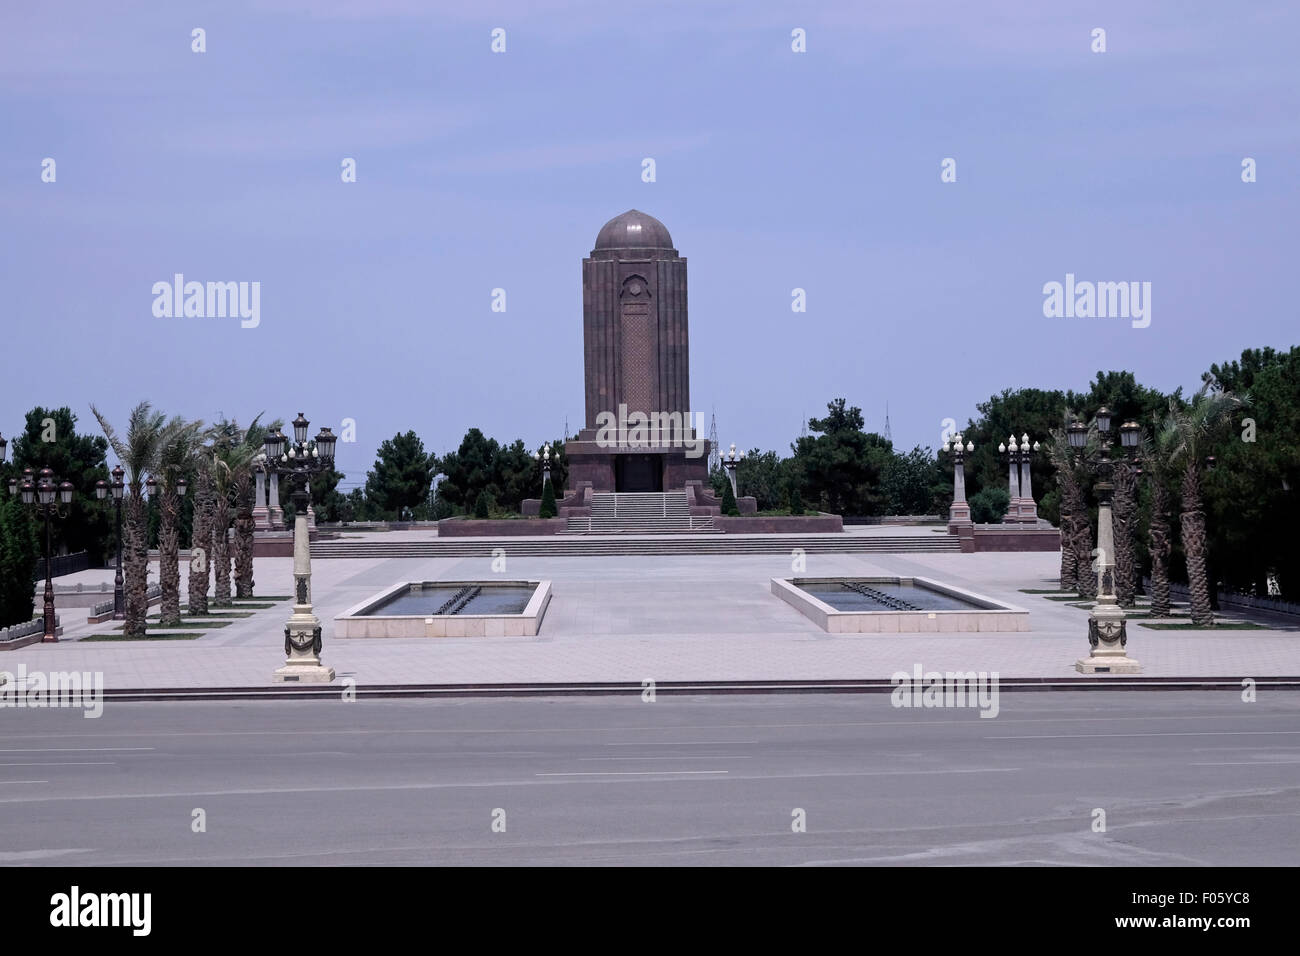 View of the Nizami Mausoleum built in honor of the 12th-century poet Nizami Ganjavi considered the greatest romantic epic poet in Persian literature placed outside the city of Ganja, Azerbaijan Stock Photo